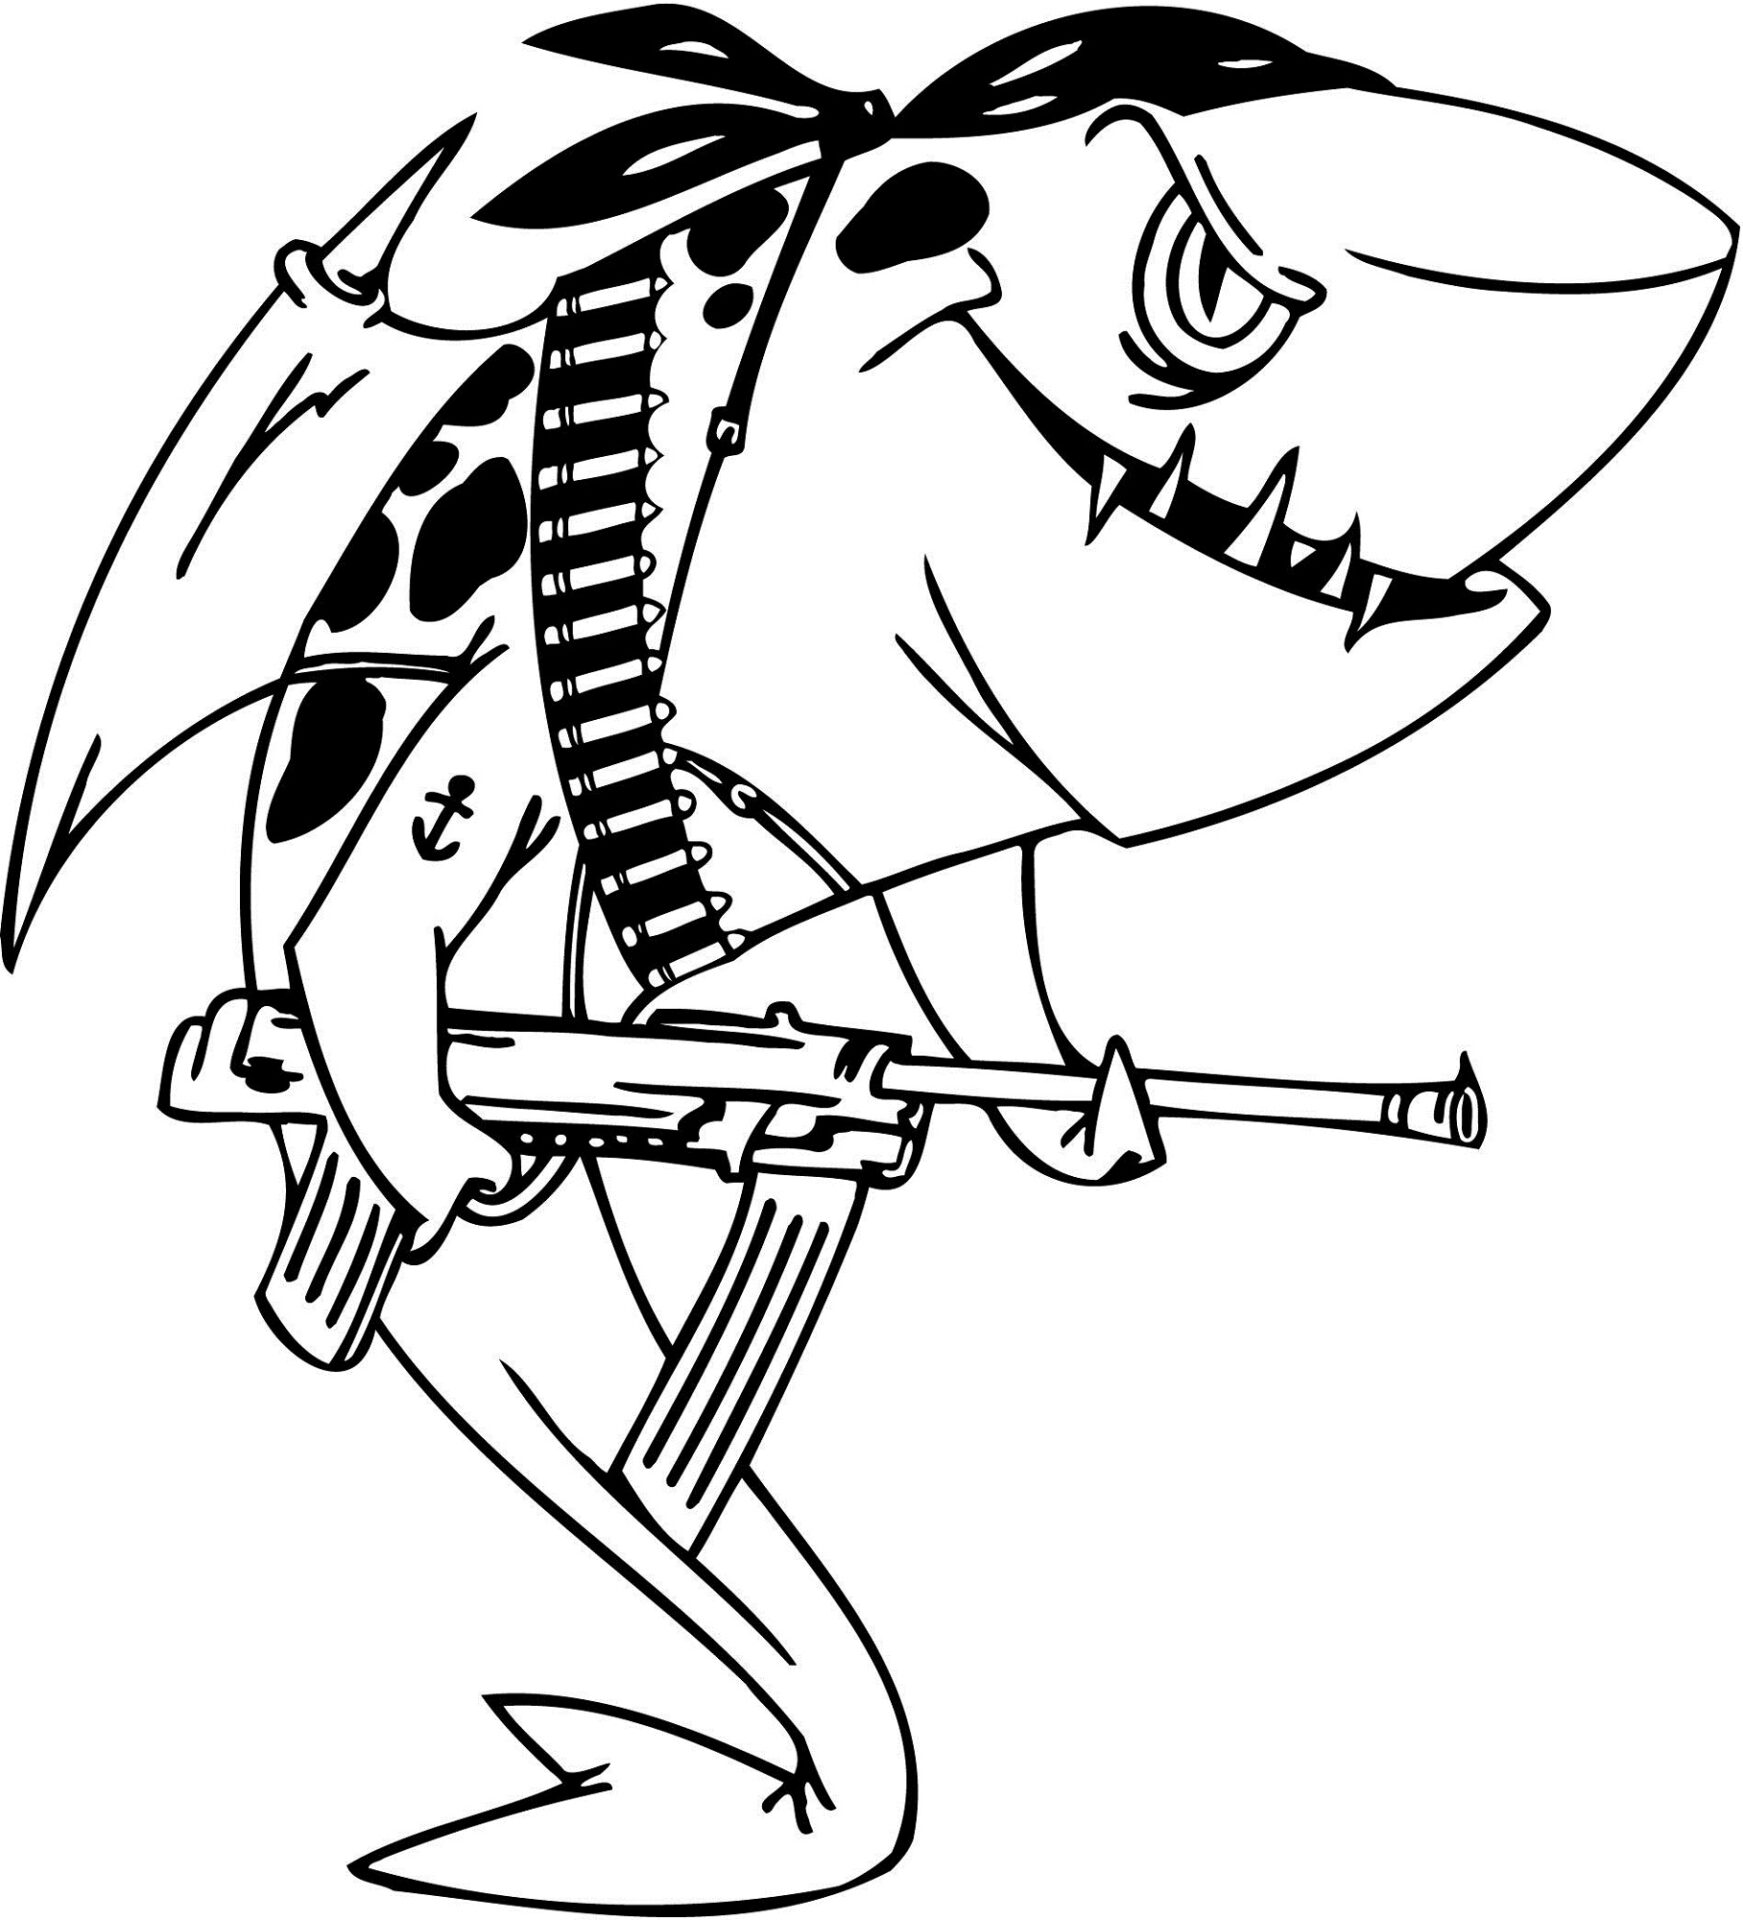 Download Shark Coloring Pages - Free Printable Coloring Pages for Kids